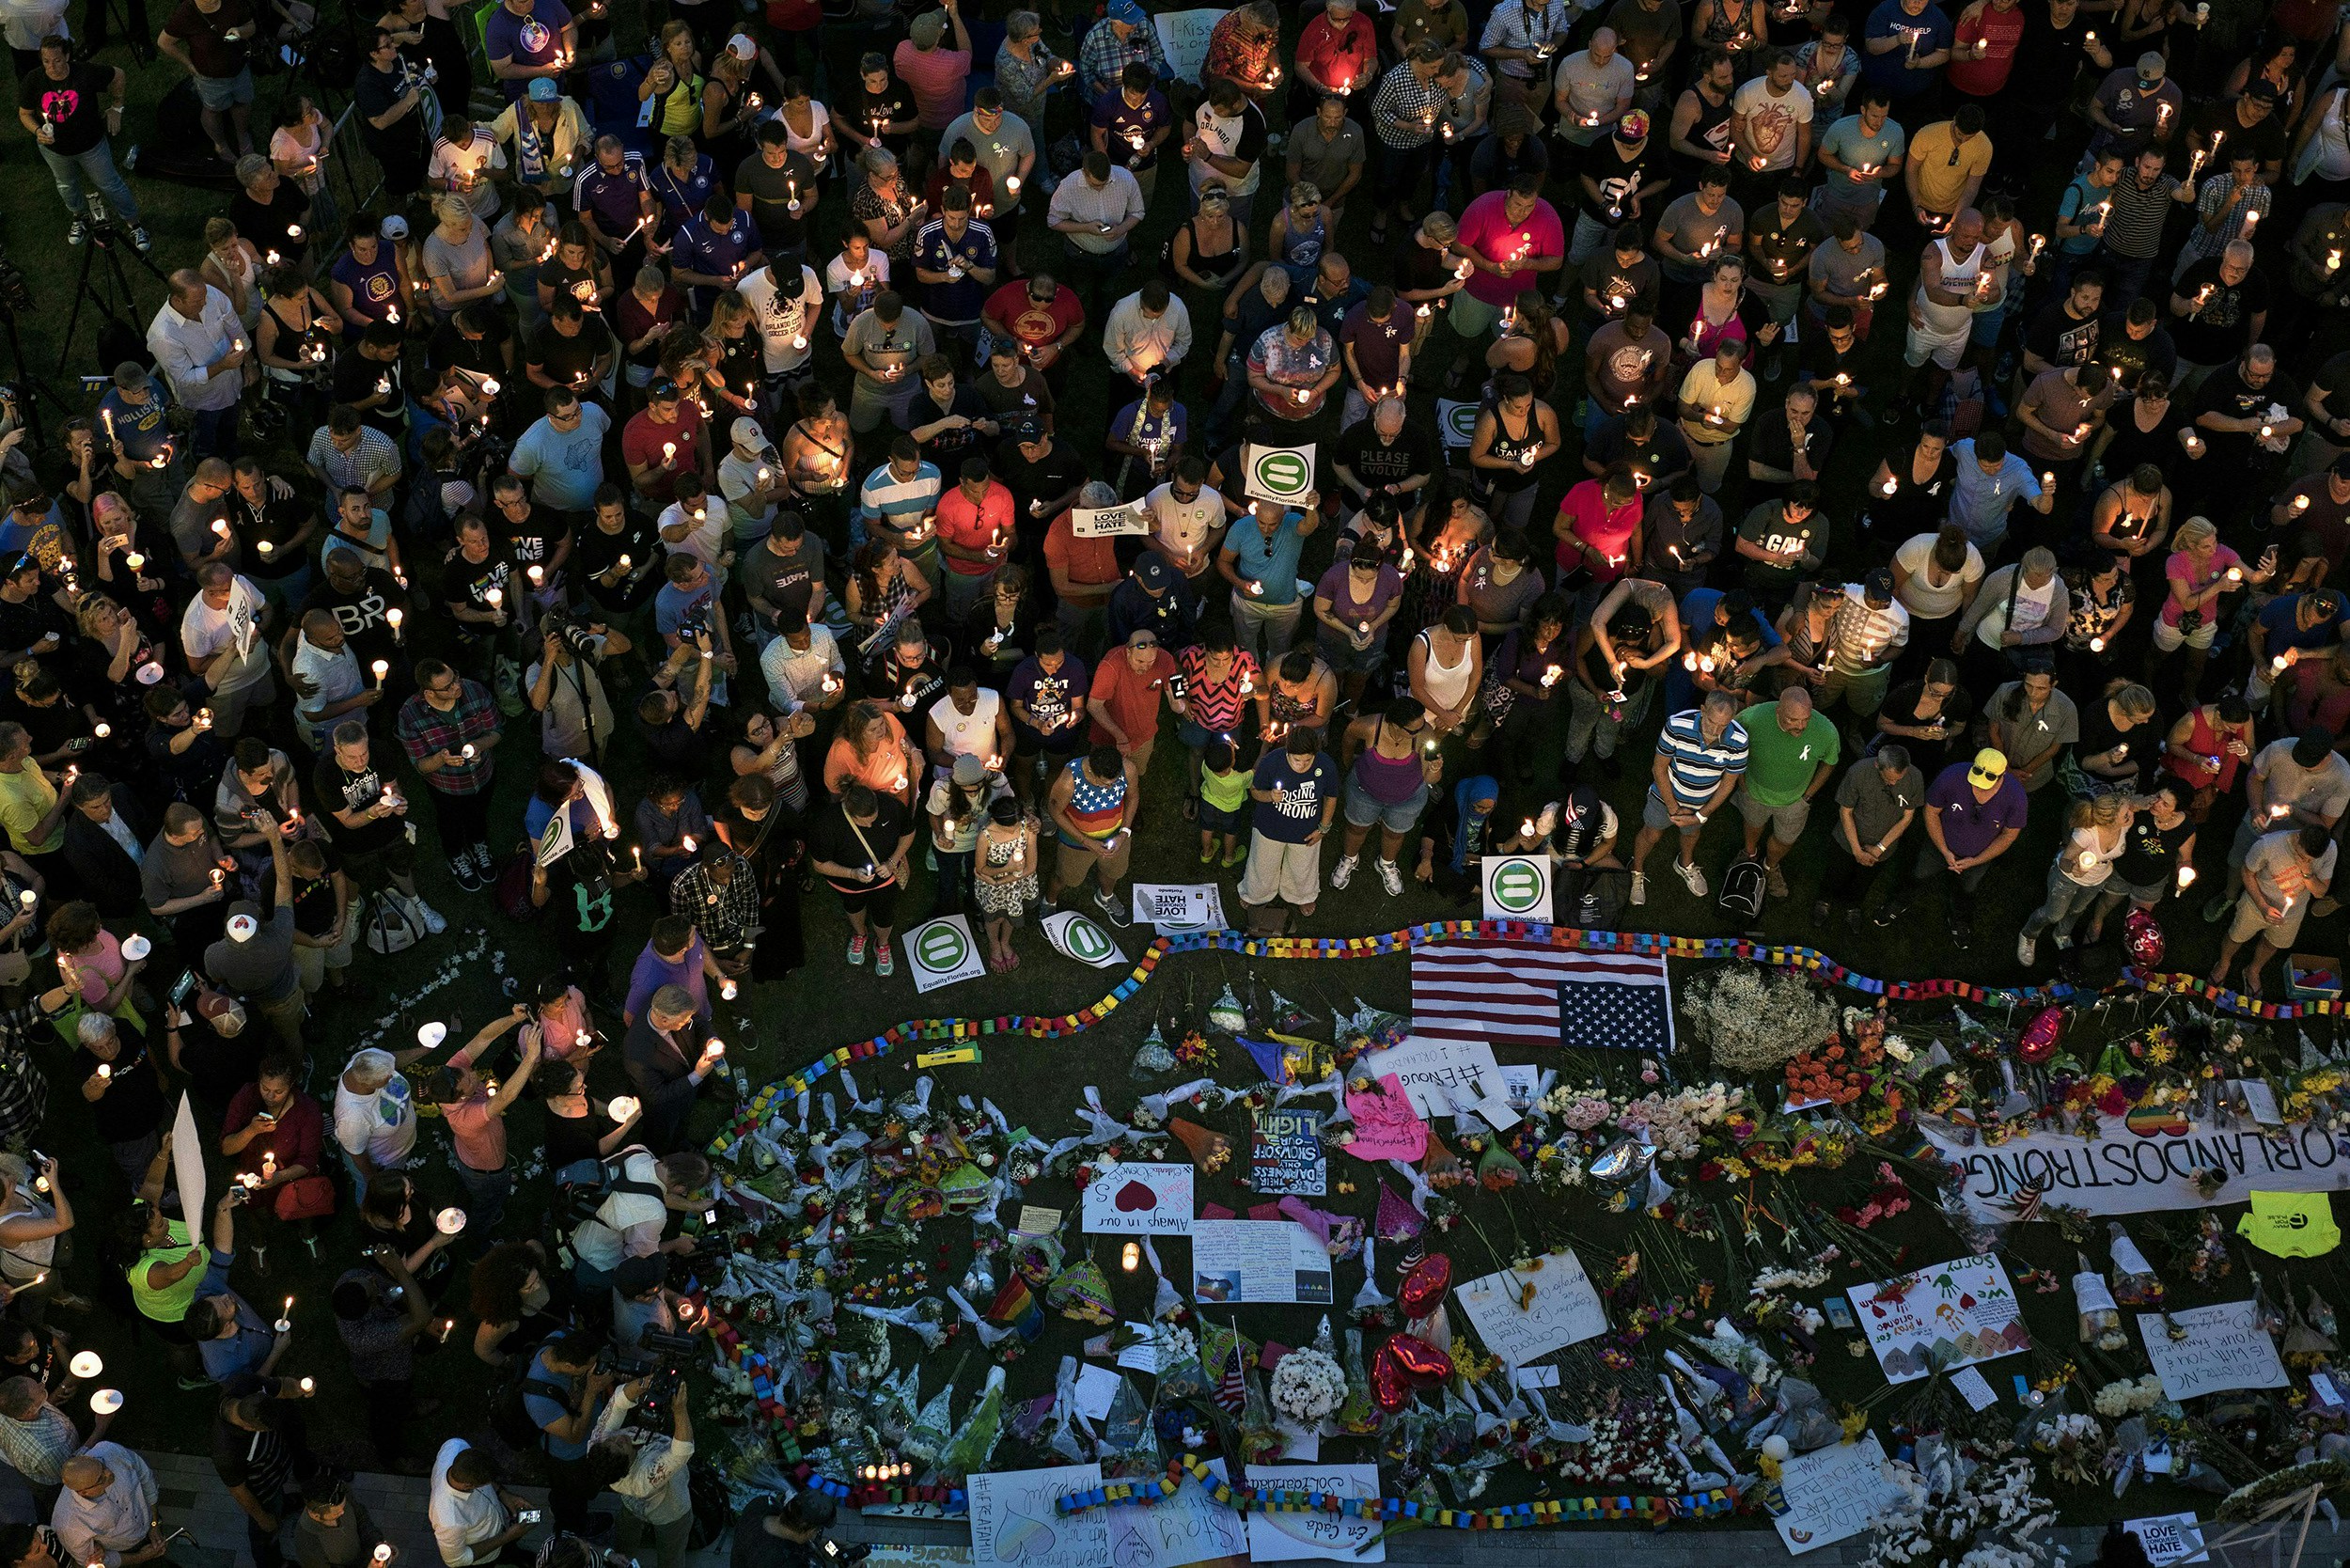 TOPSHOT - Mourners hold candles while observing a moment of silence during a vigil outside the Dr. Phillips Center for the Performing Arts for the mass shooting victims at the Pulse nightclub June 13, 2016 in Orlando, Florida.The American gunman who launched a murderous assault on a gay nightclub in Orlando was radicalized by Islamist propaganda, officials said Monday, as they grappled with the worst terror attack on US soil since 9/11. / AFP / Brendan Smialowski (Photo credit should read BRENDAN SMIALOWSKI/AFP/Getty Images)